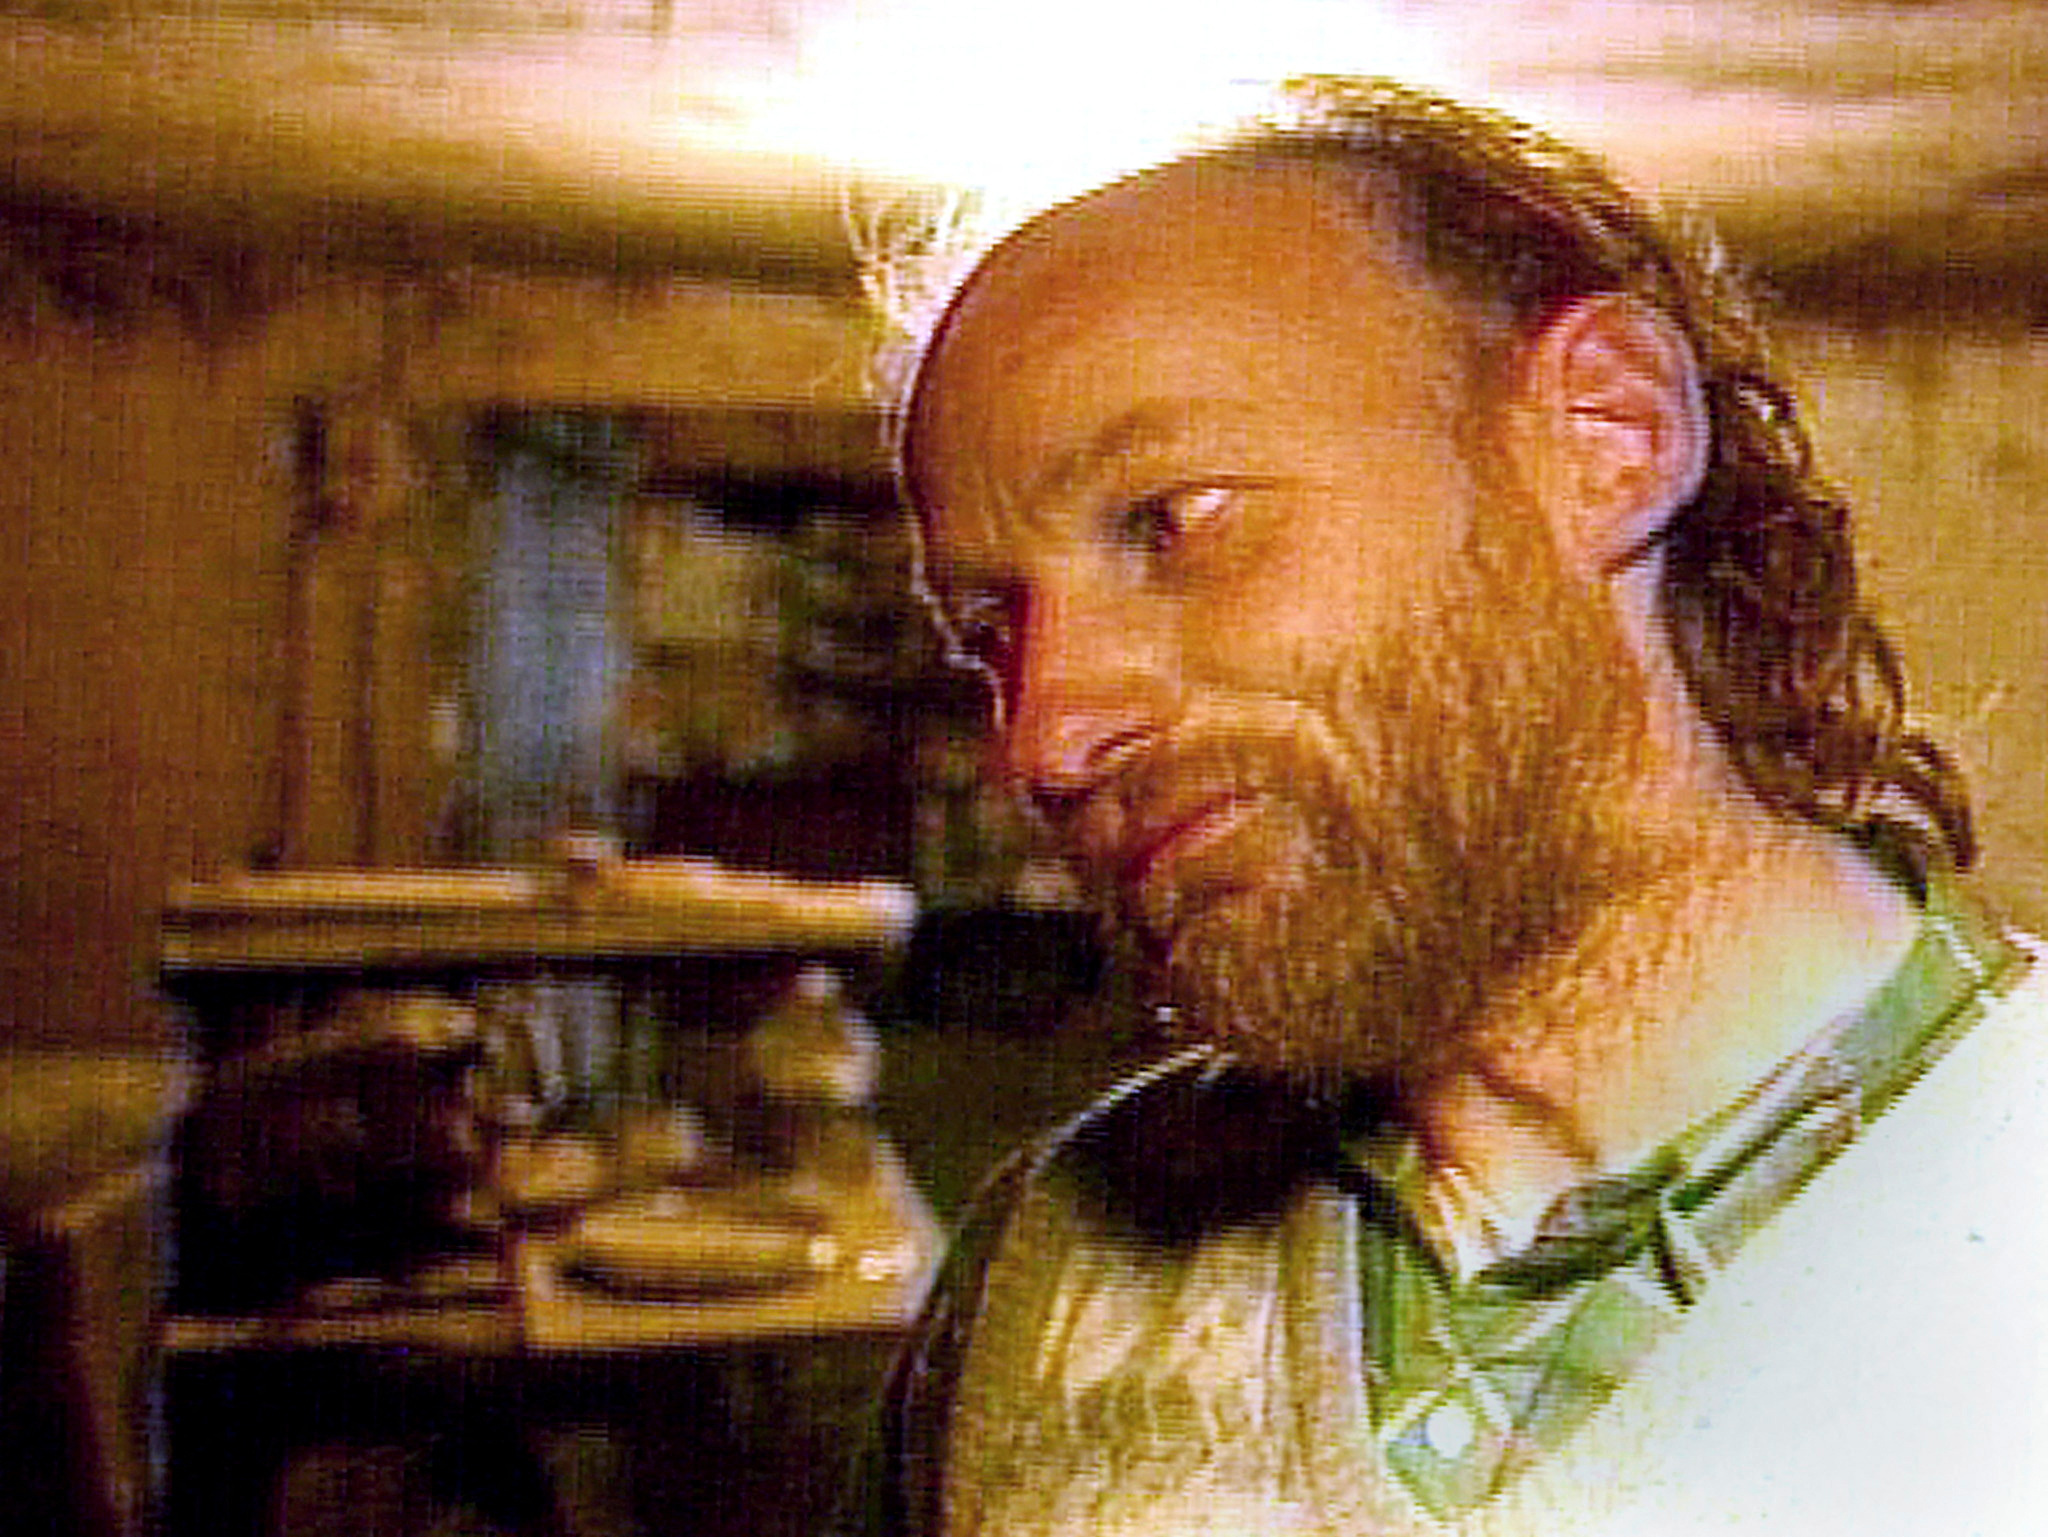 Serial killer Robert Pickton, who brought dozens of female victims to his pig farm, dead after prison assault